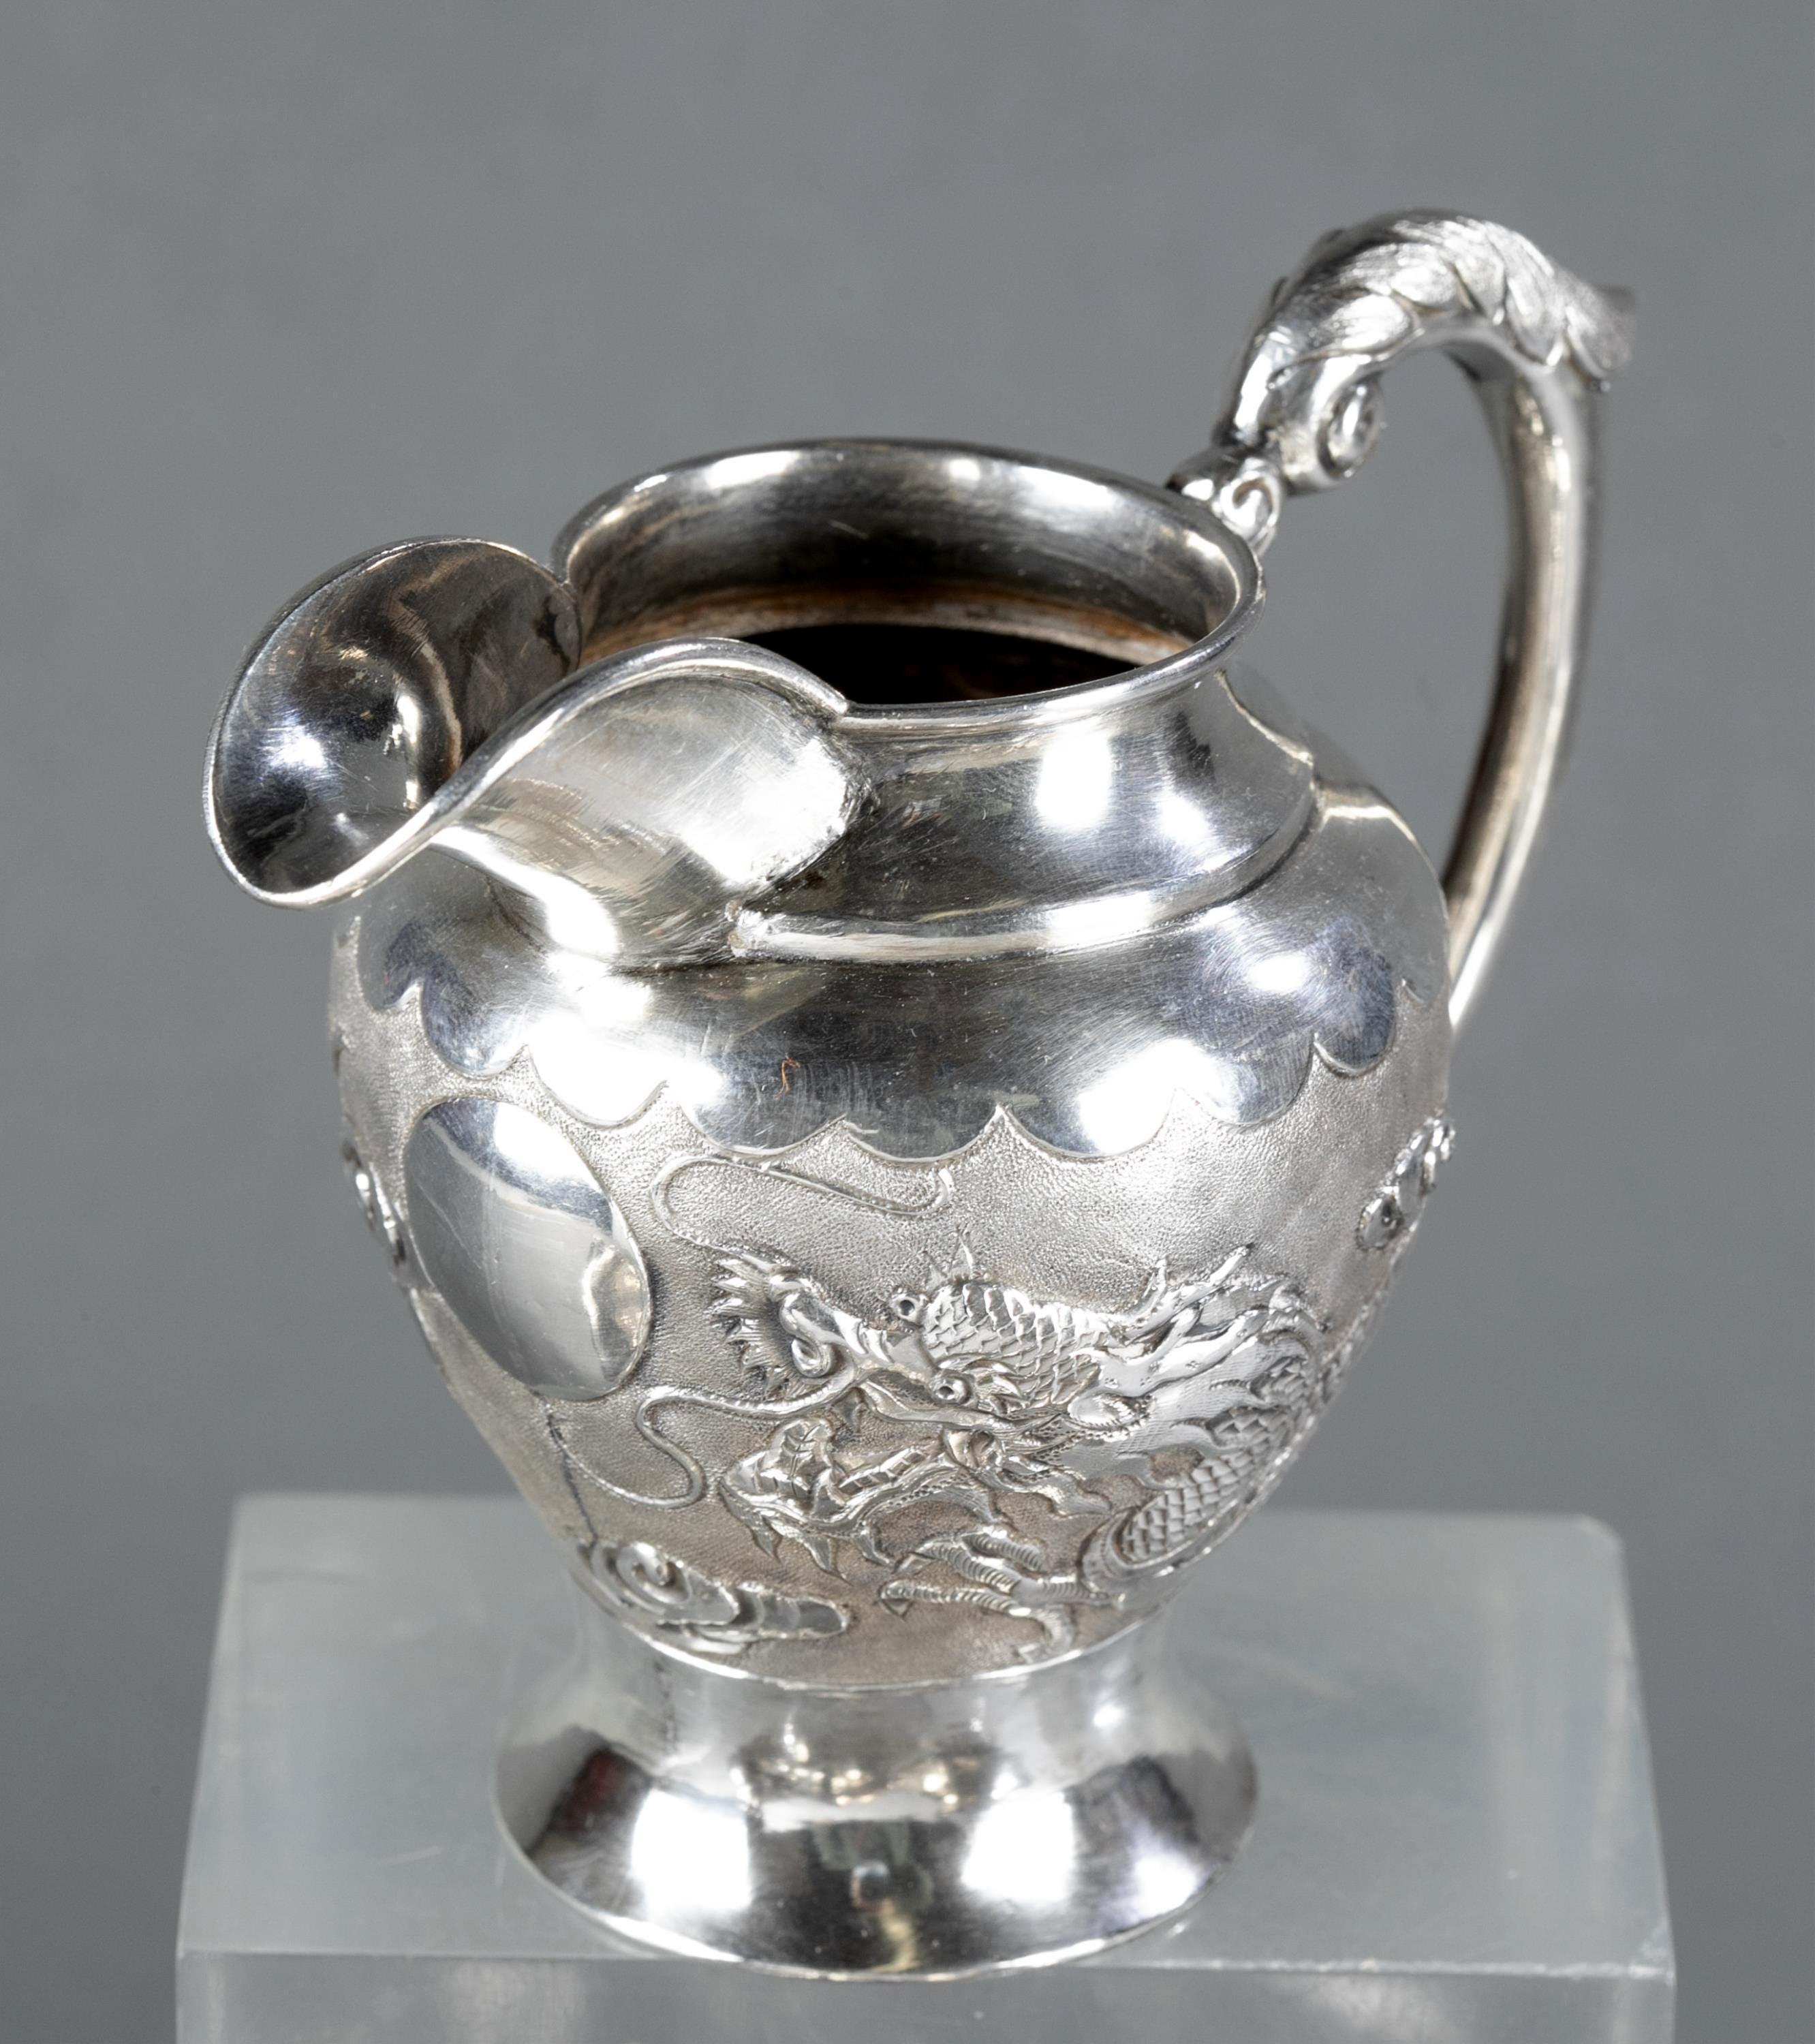 Rare Chinese Export Sterling Silver Tea Set with Dragon Design Tianjing Wuhua For Sale 3